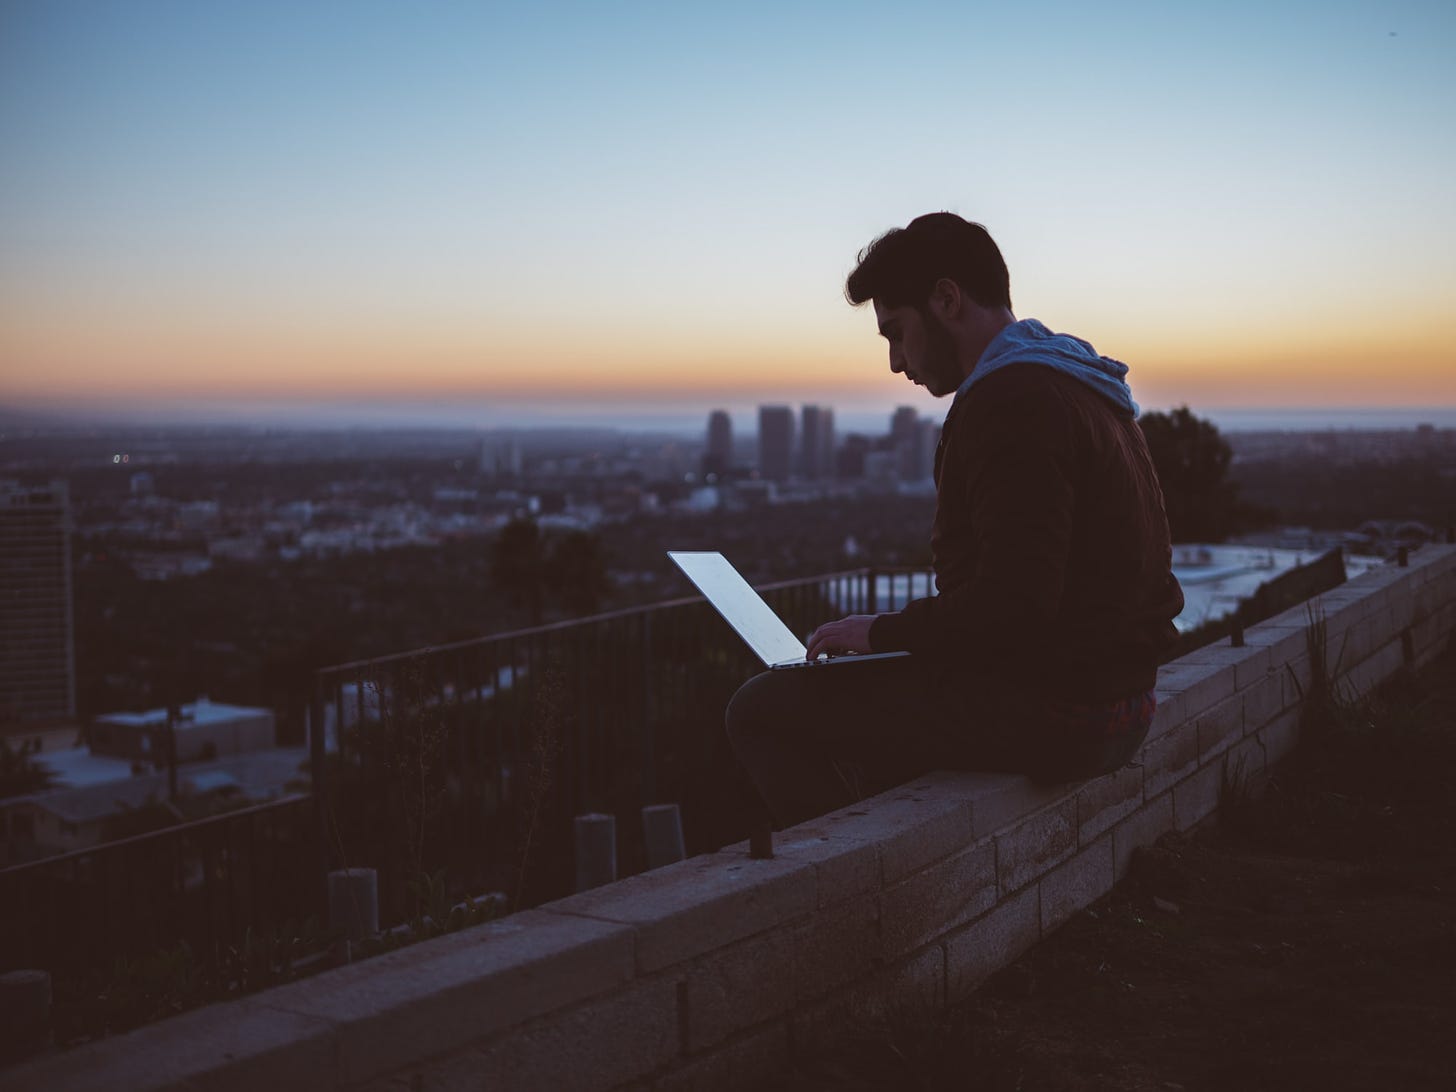 An image of a person doing some video editing on a rooftop